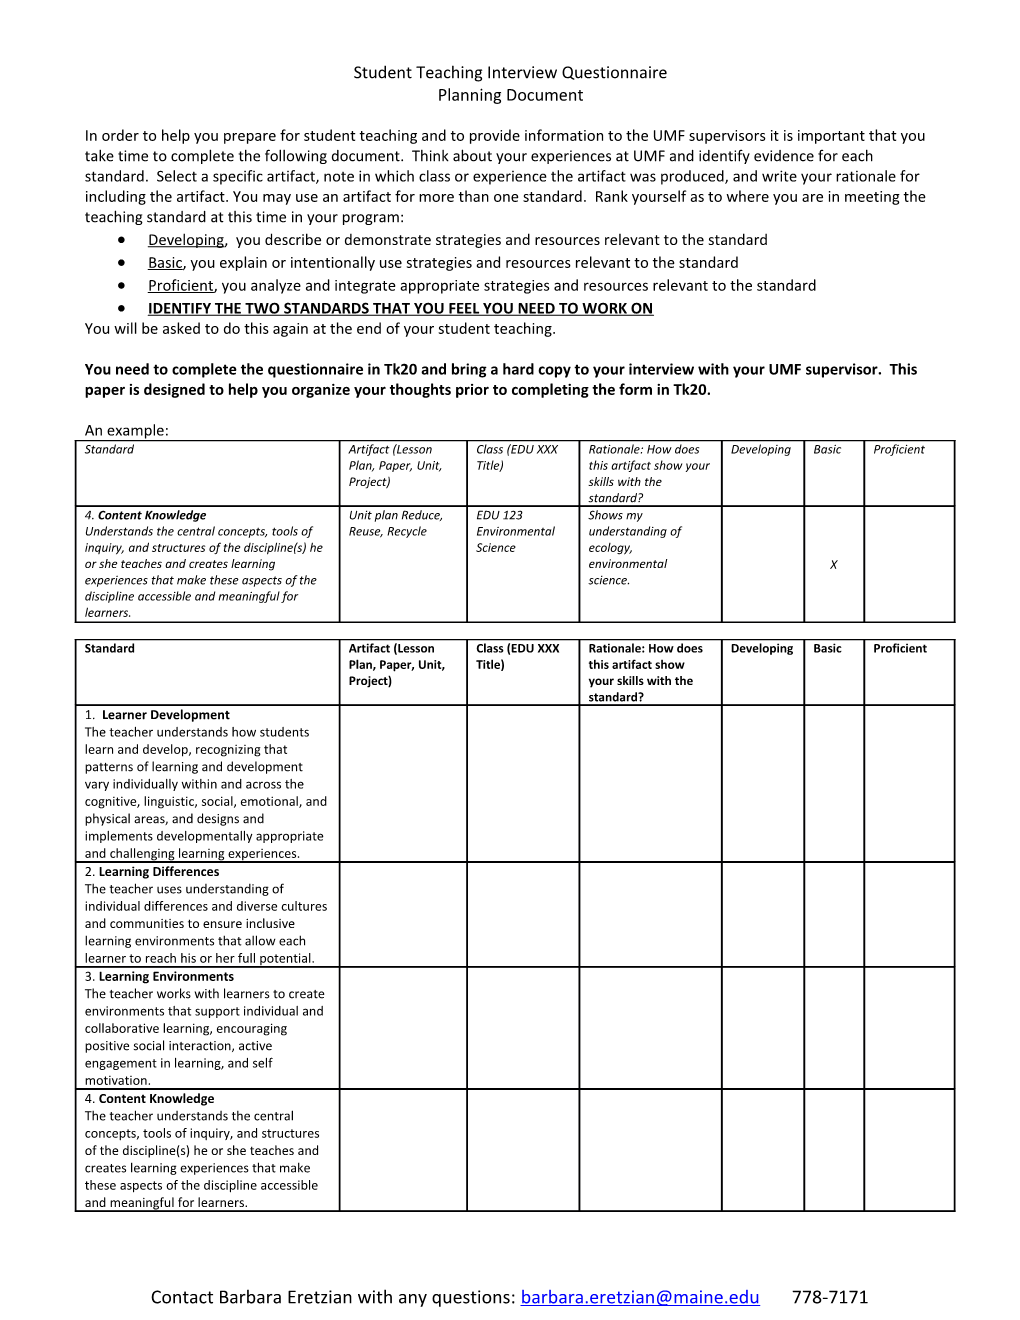 Student Teaching Interview Questionnaire